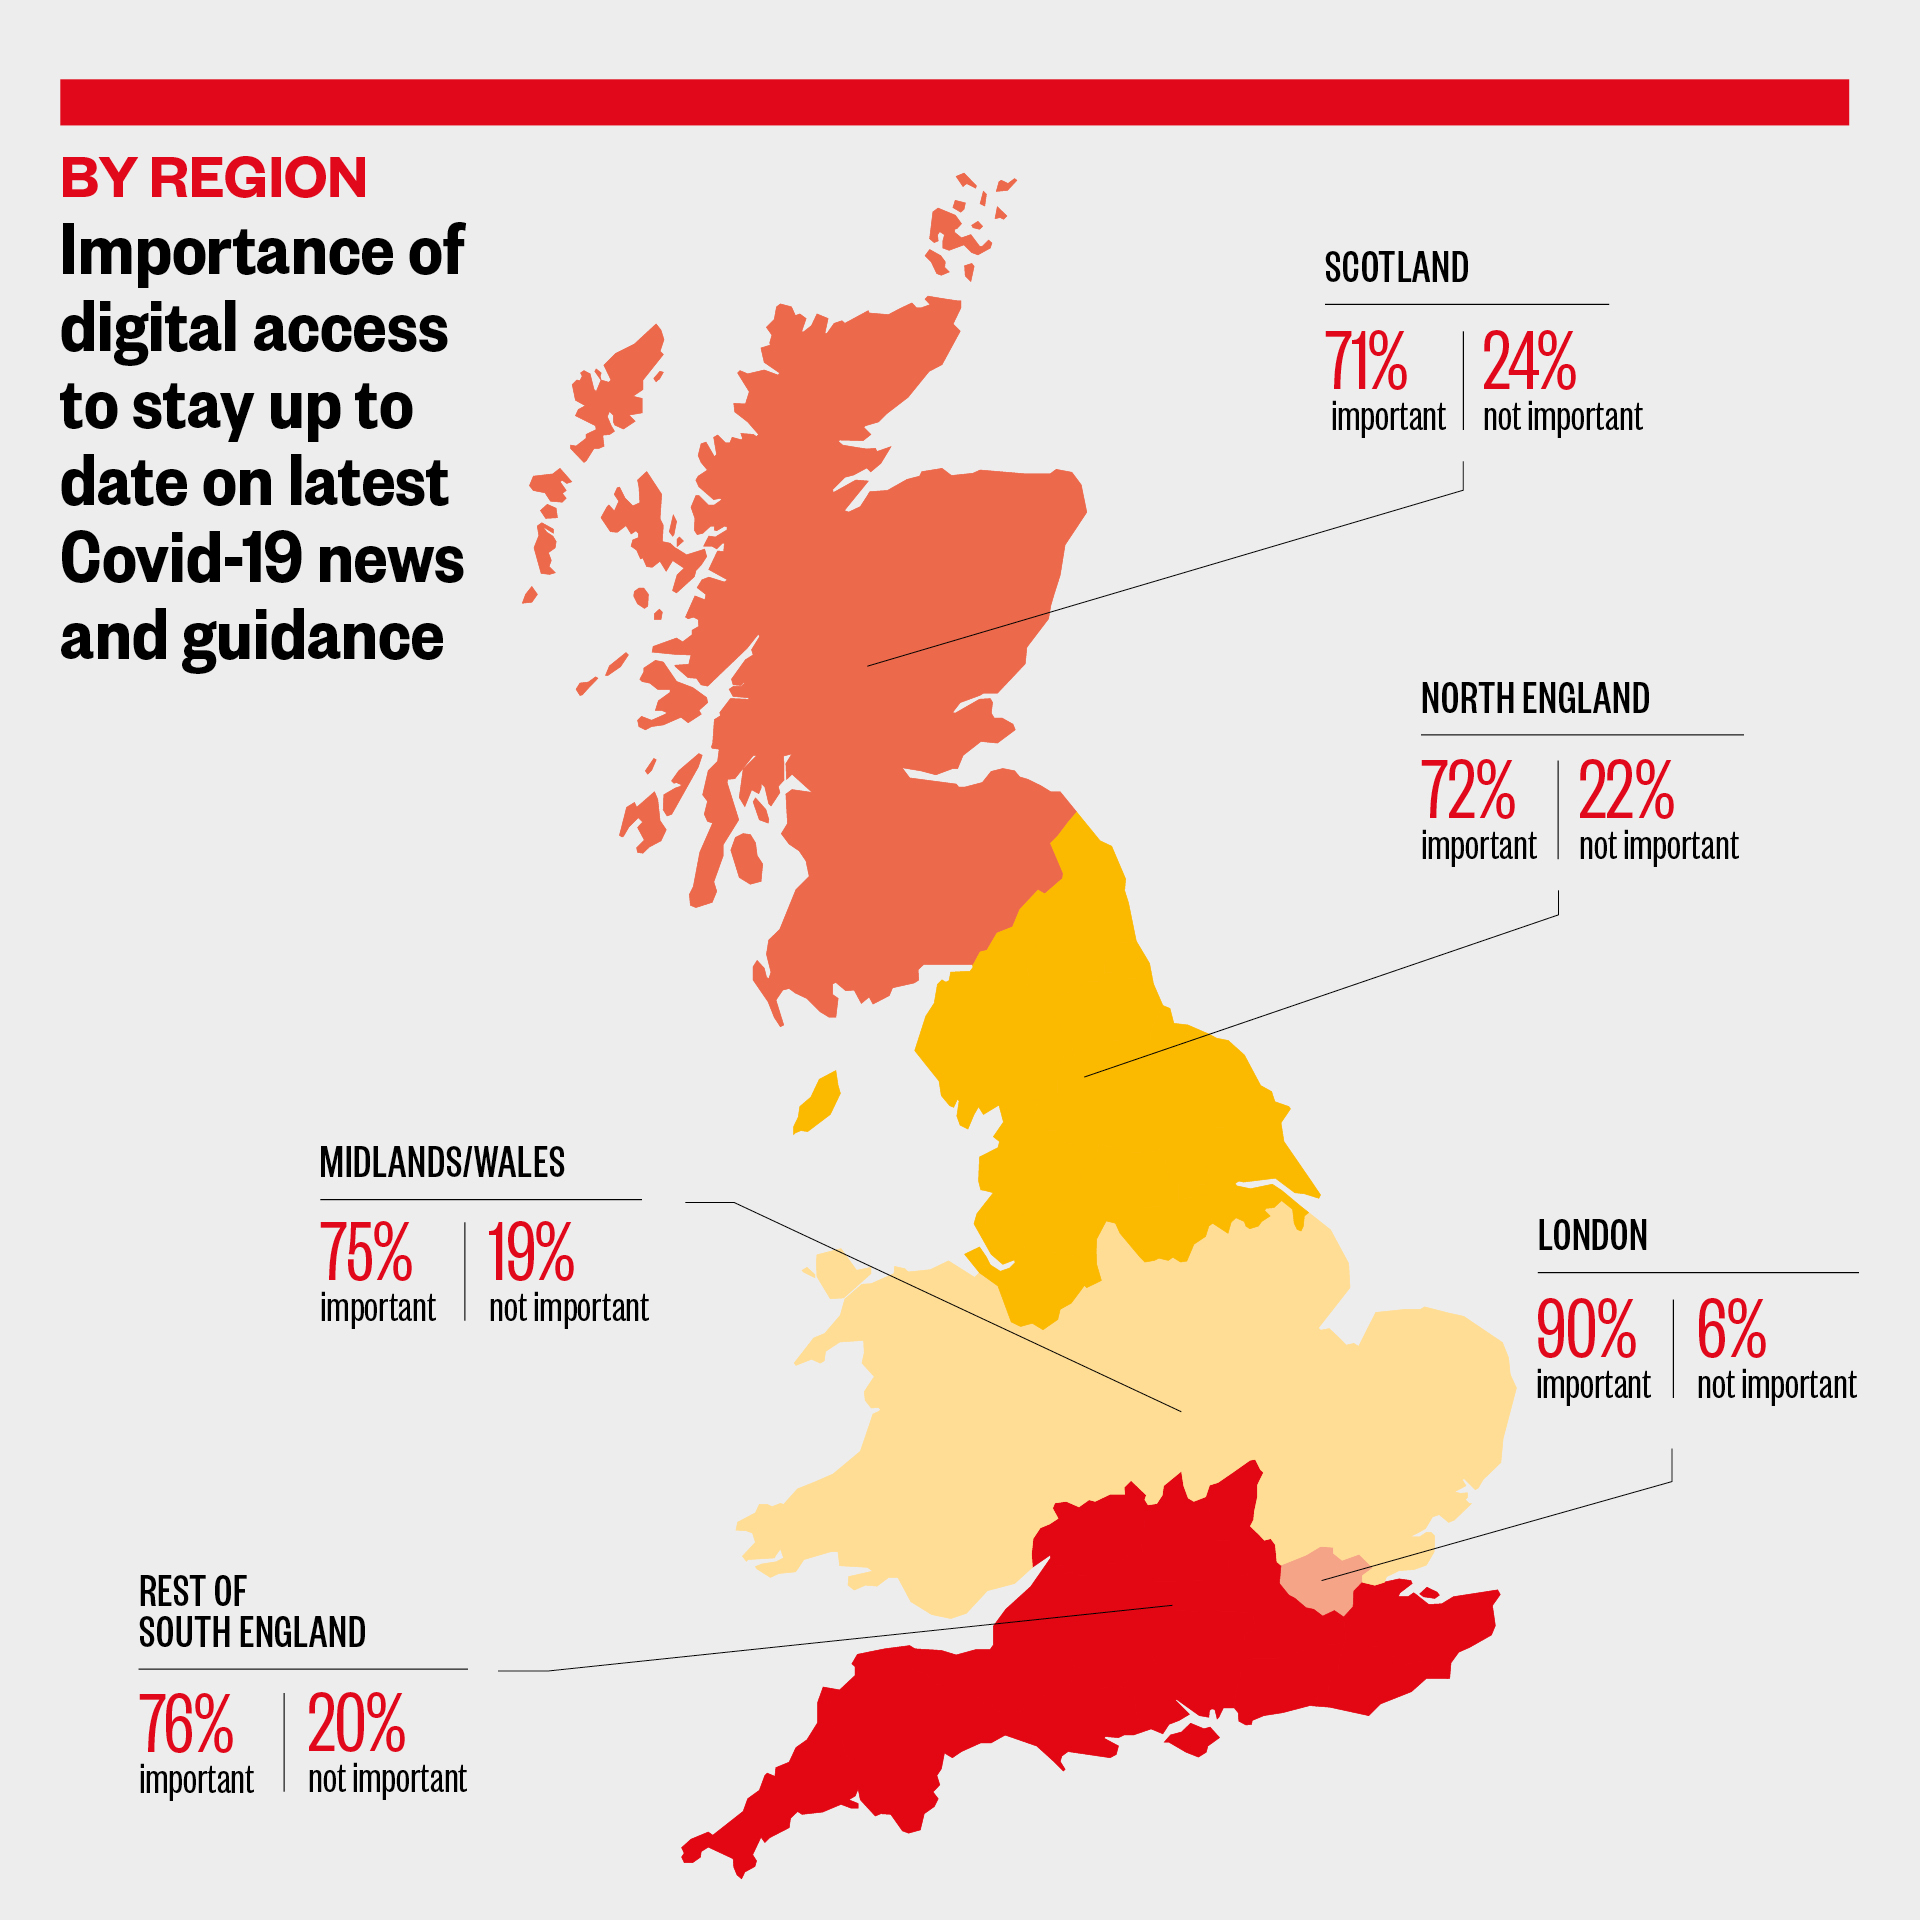 (By region) Importance of digital access to stay up to date on latest Covid-19 guidance